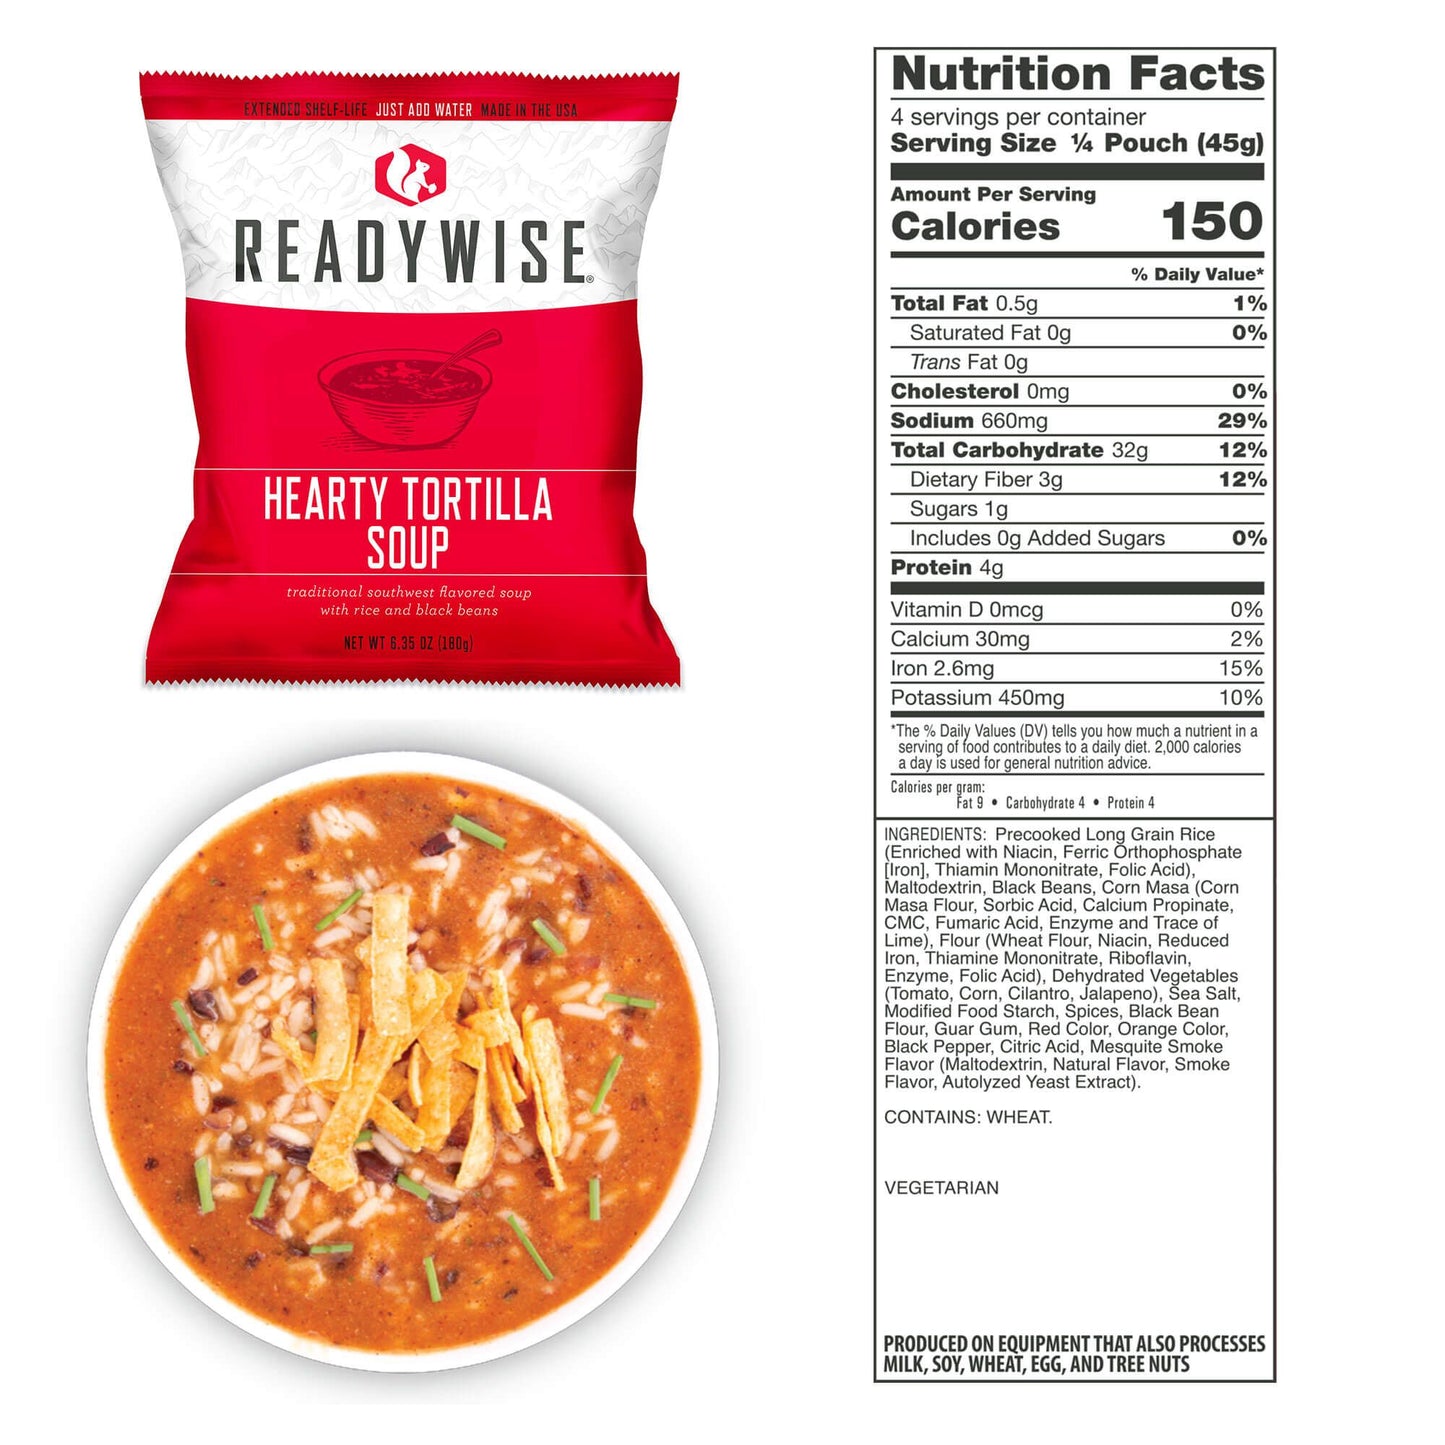 Hearty Tortilla Soup packet displayed in a bowl with nutritional information